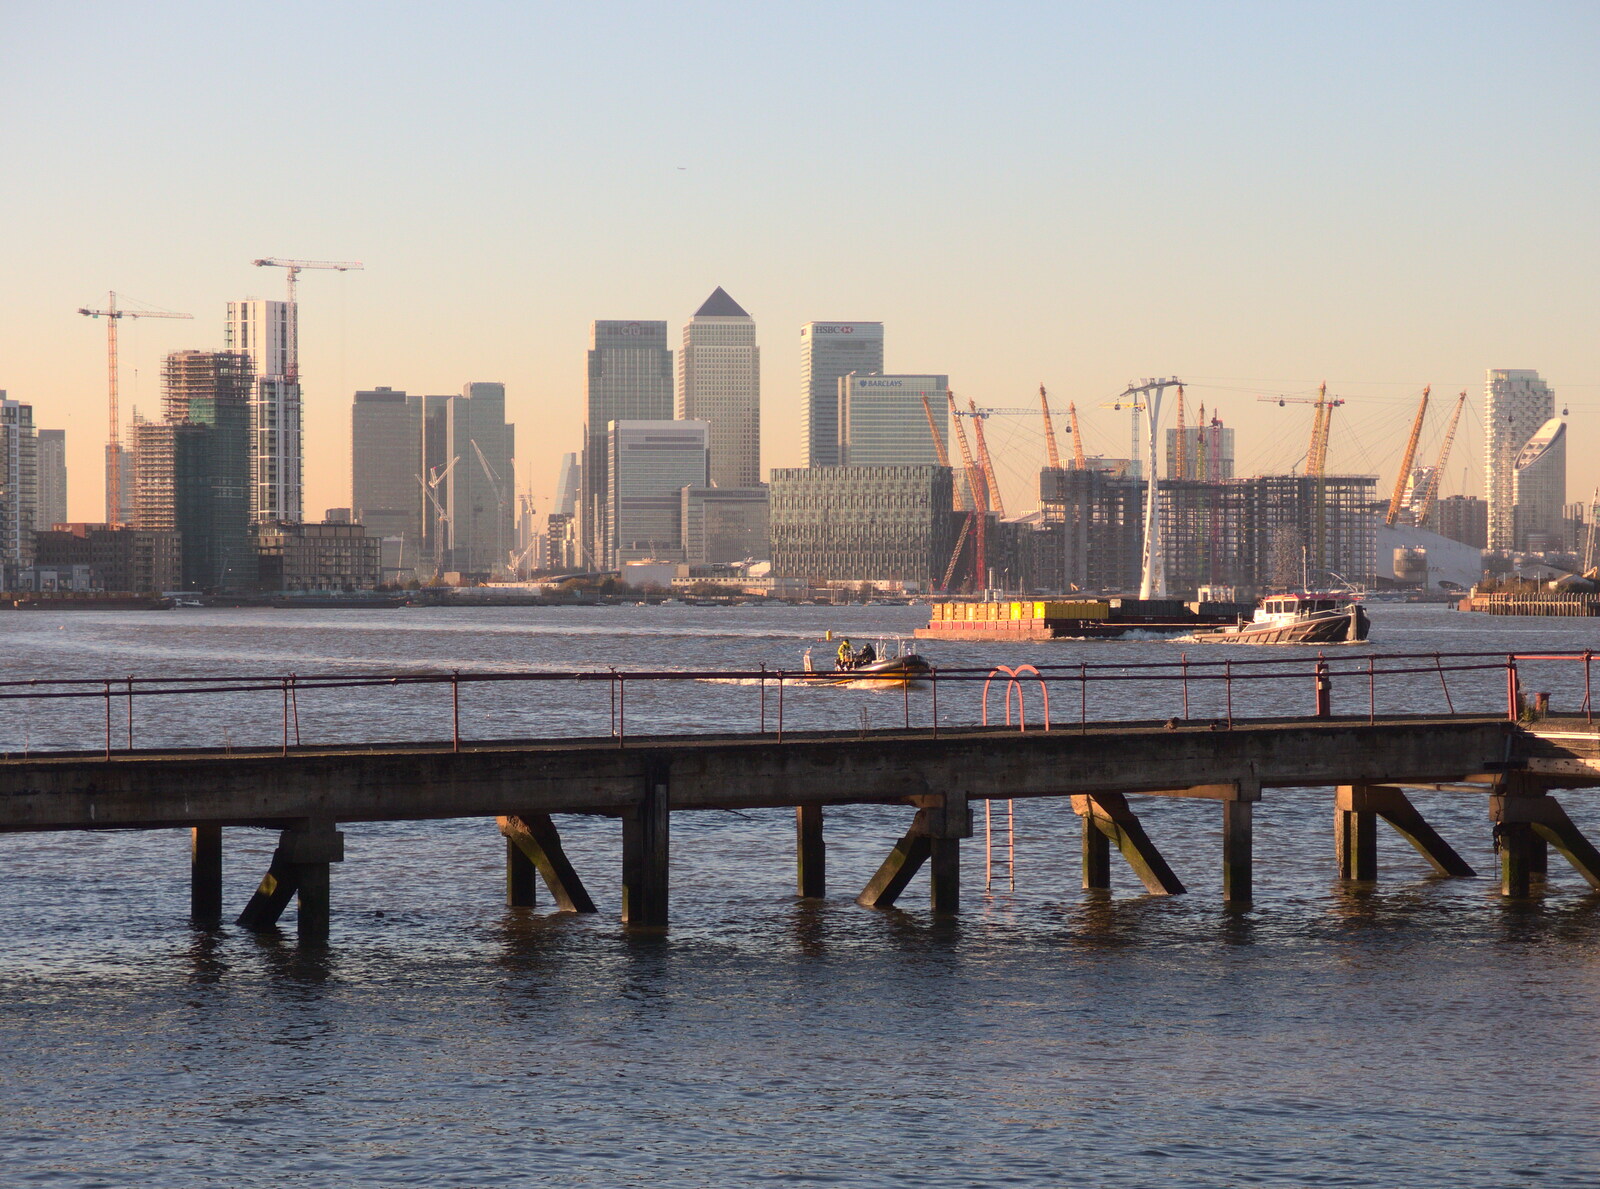 Looking over to Docklands from the Thames Barrier from SwiftKey Does Laser Tag, Charlton and Greenwich, London - 29th November 2016